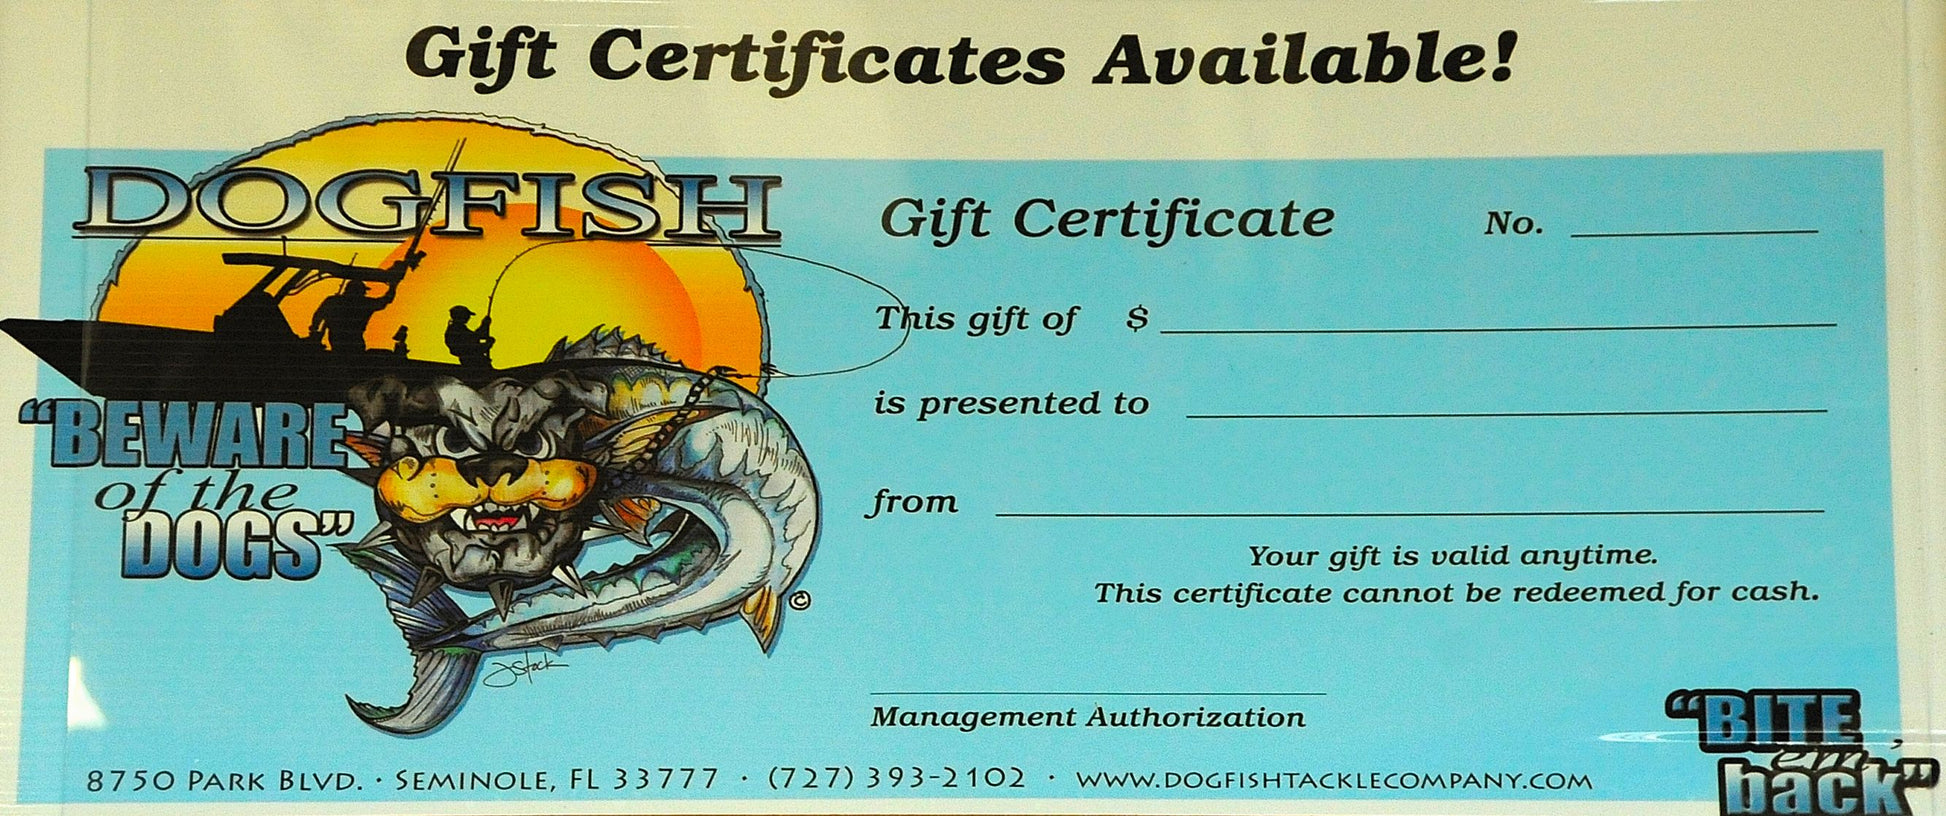 Online Gift Card - CANNOT BE USED IN-STORE - ONLINE REDEMPTION ONLY - Dogfish Tackle & Marine